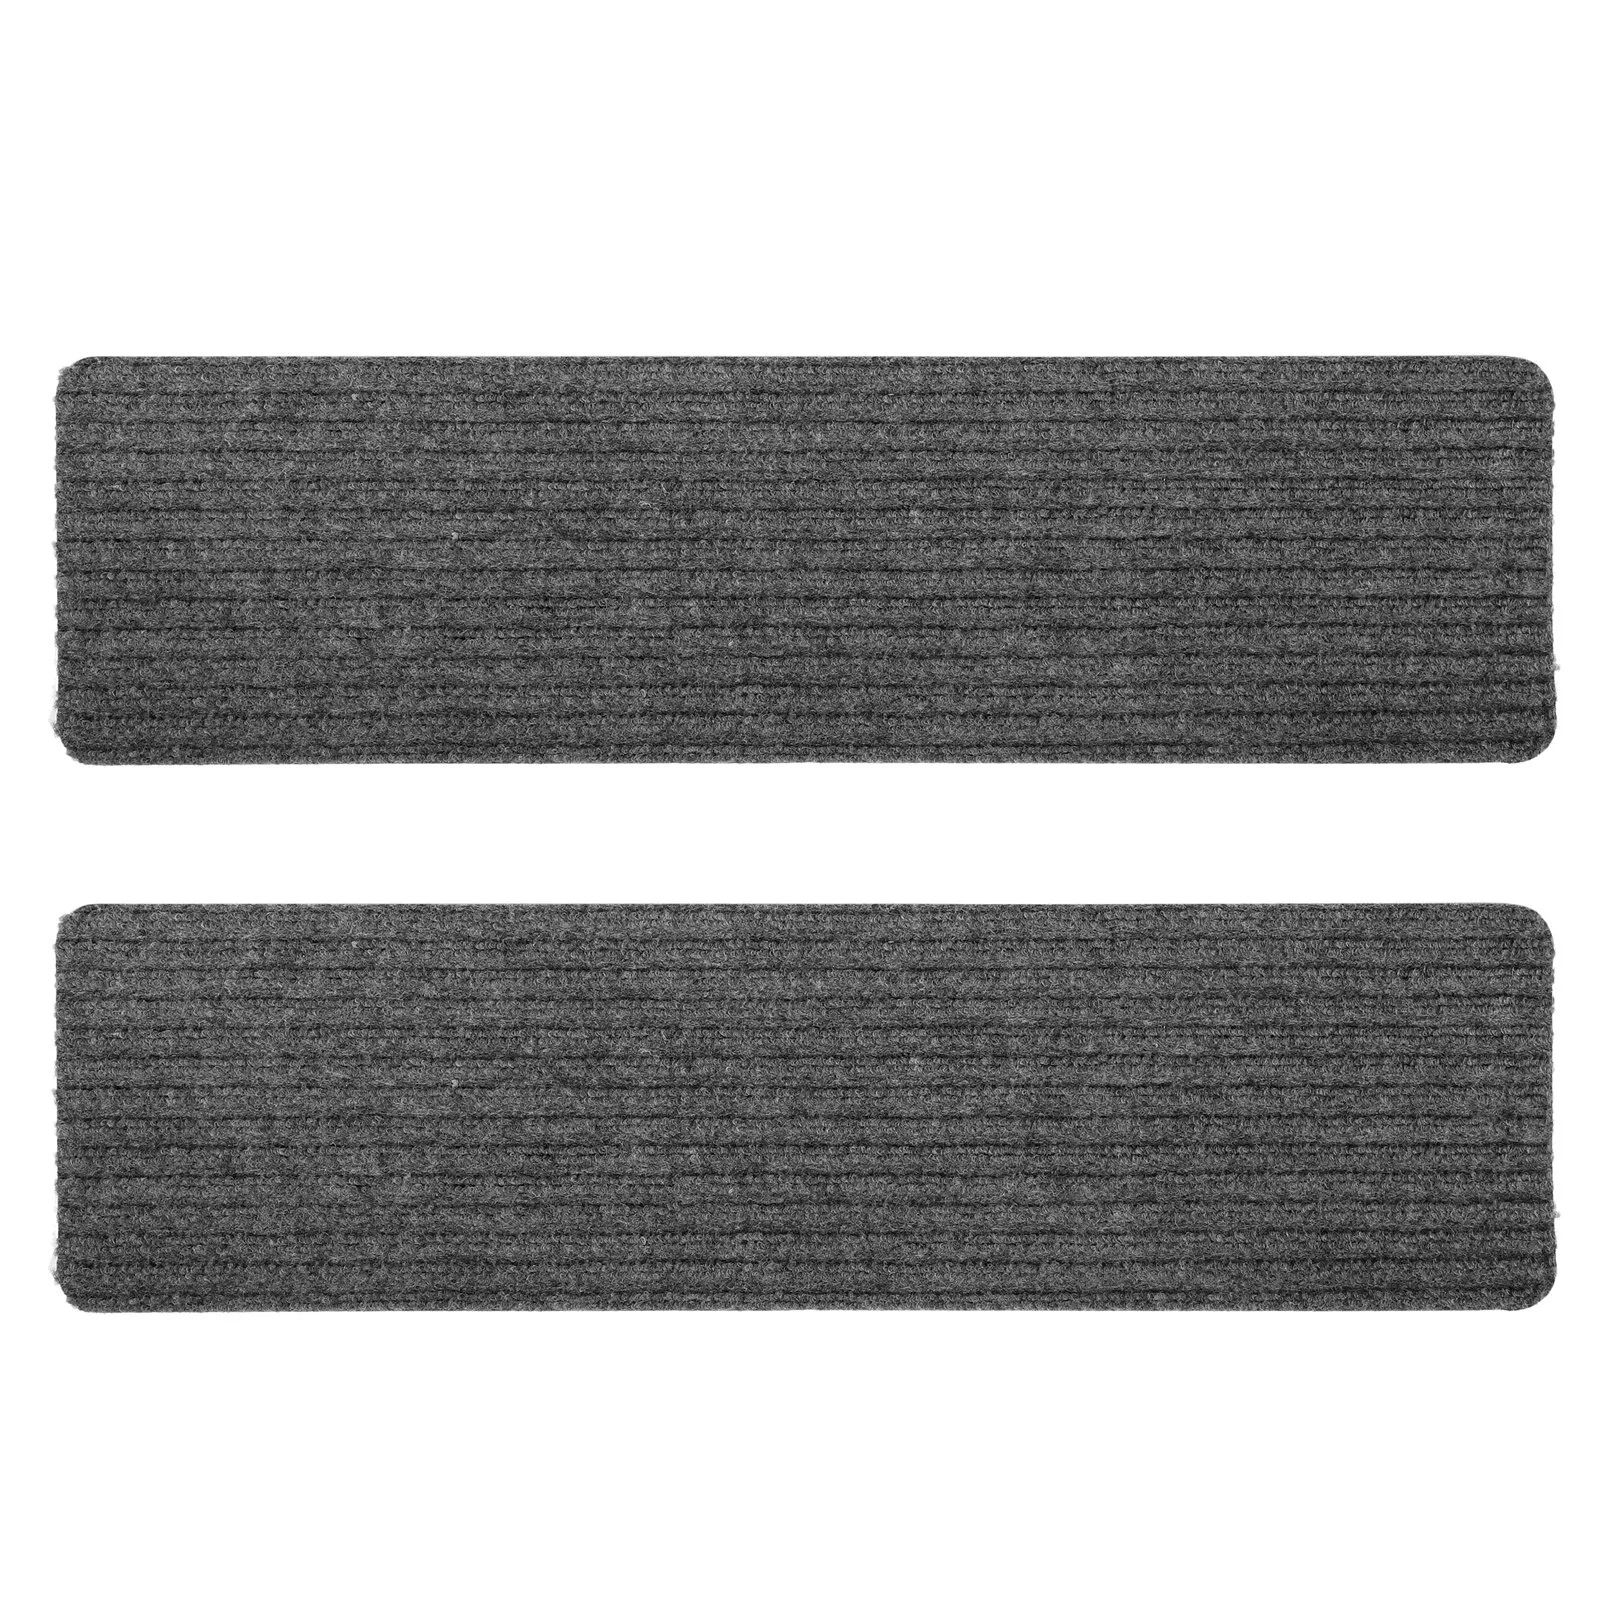 

2 Pcs Seat Belt Indoor Outdoor Area Rug Non-skid Mat Step Sticker Anti-skip Outdoor Self-adhesive Household Grasp Pads Treads